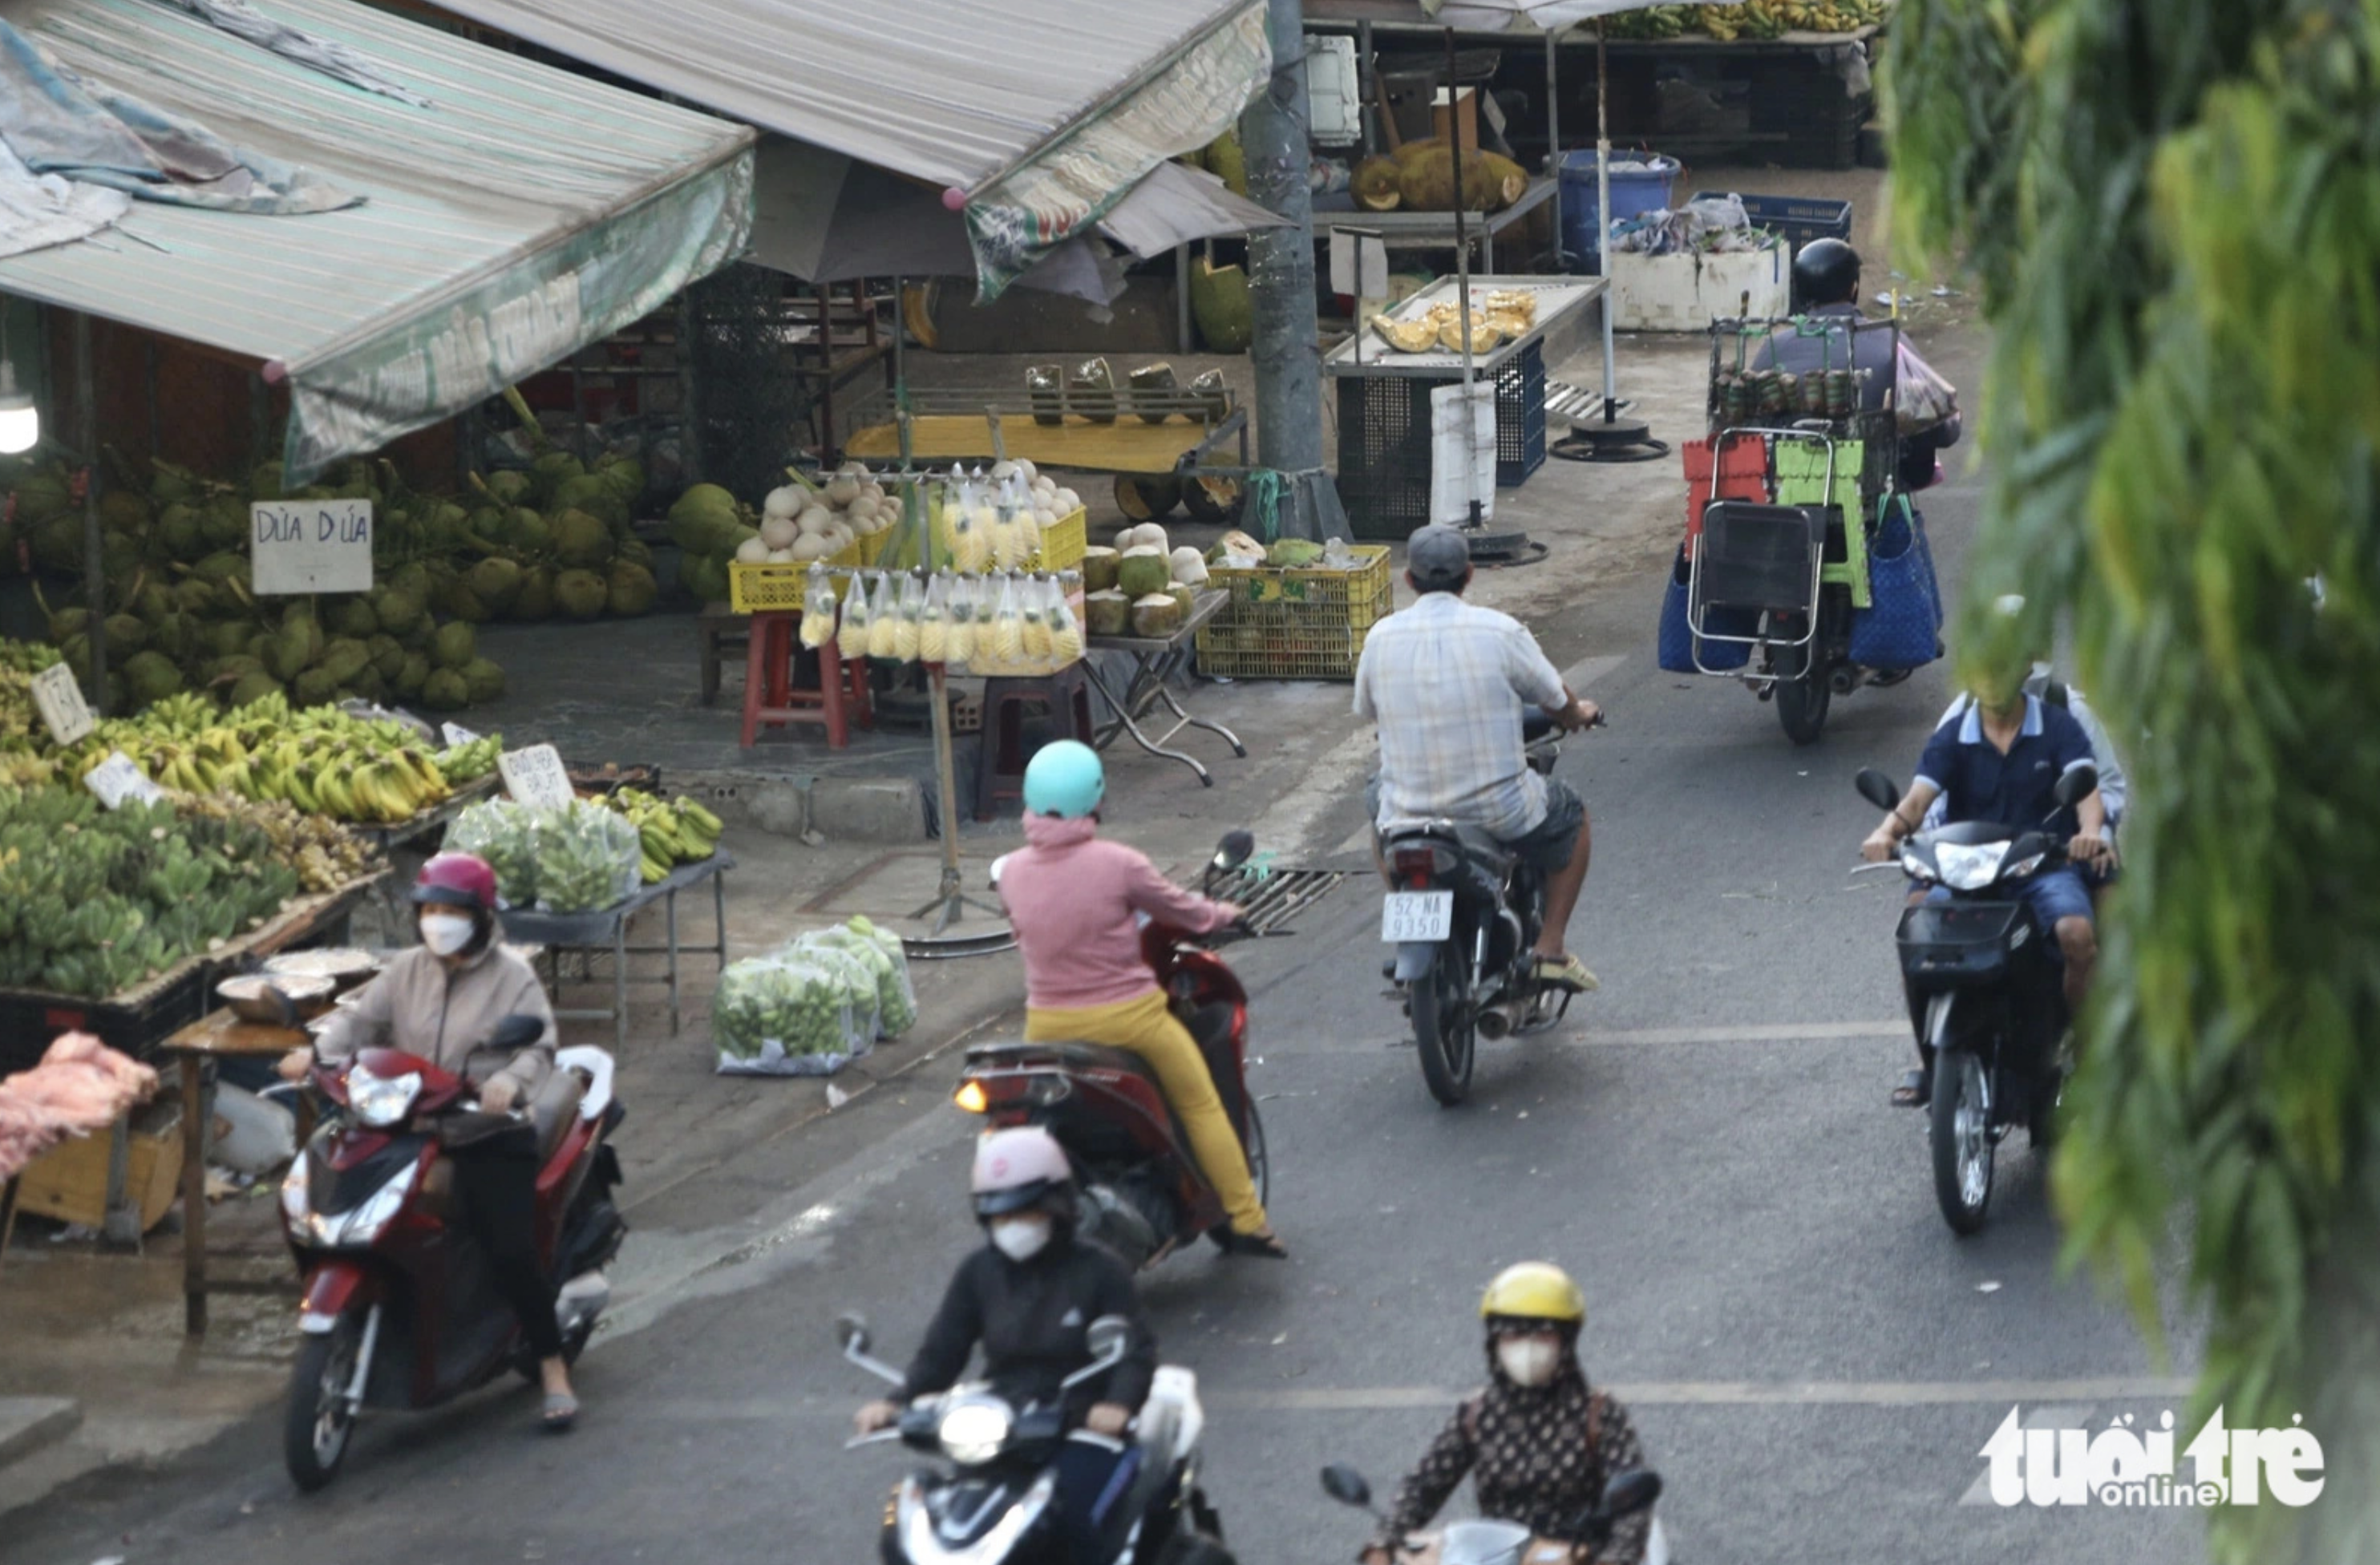 Market-goers ride their motorcycles on the wrong side of National Highway 1 to buy farm produce at street stalls in front of Thu Duc Wholesale Market. Photo: Minh Hoa / Tuoi Tre